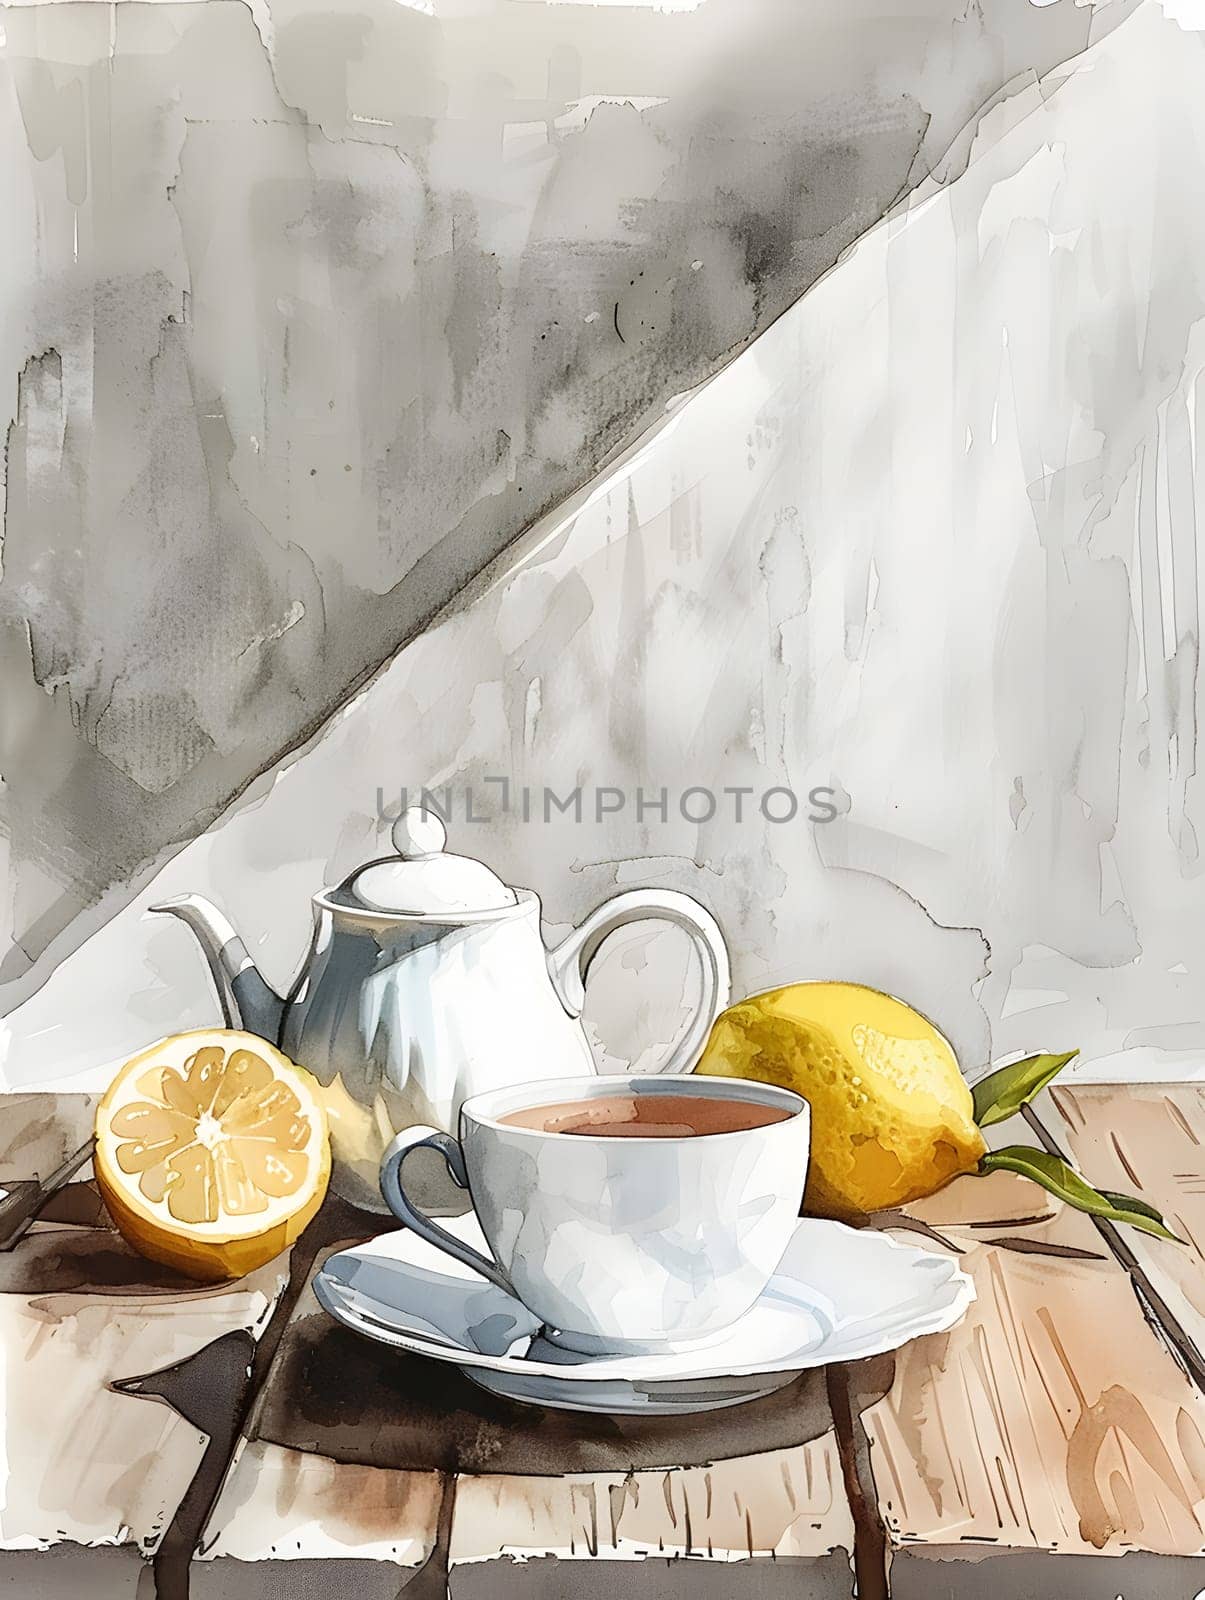 Watercolor of tea cup, lemons, and teapot on wooden table by Nadtochiy